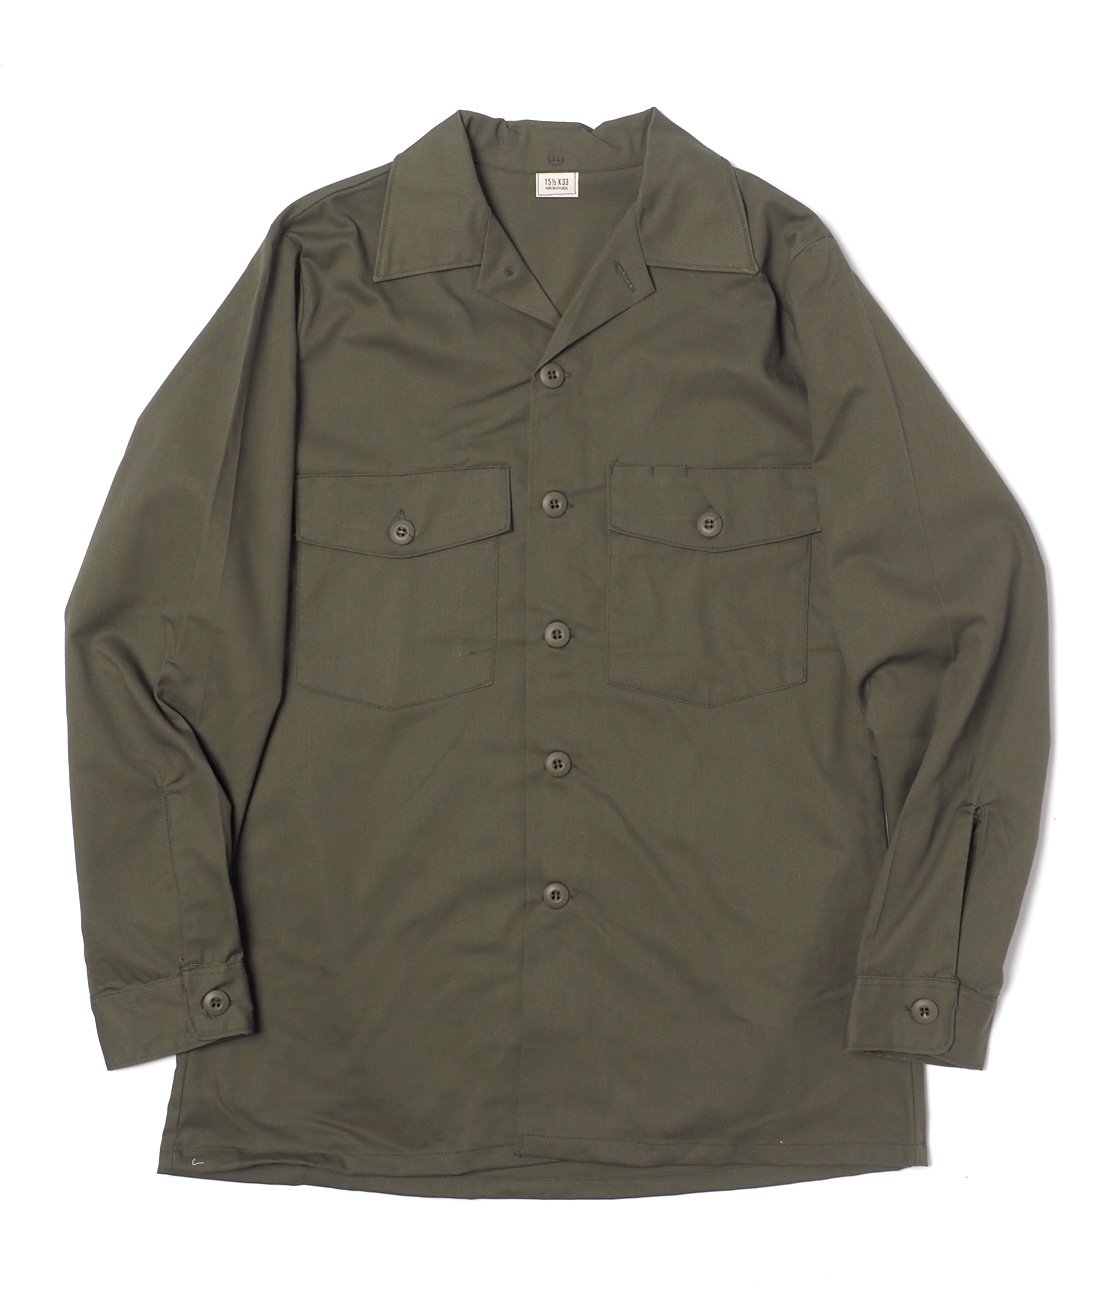 DEAD STOCK】80s US ARMY UTILITY SHIRT - OLIVE GREEN 米軍